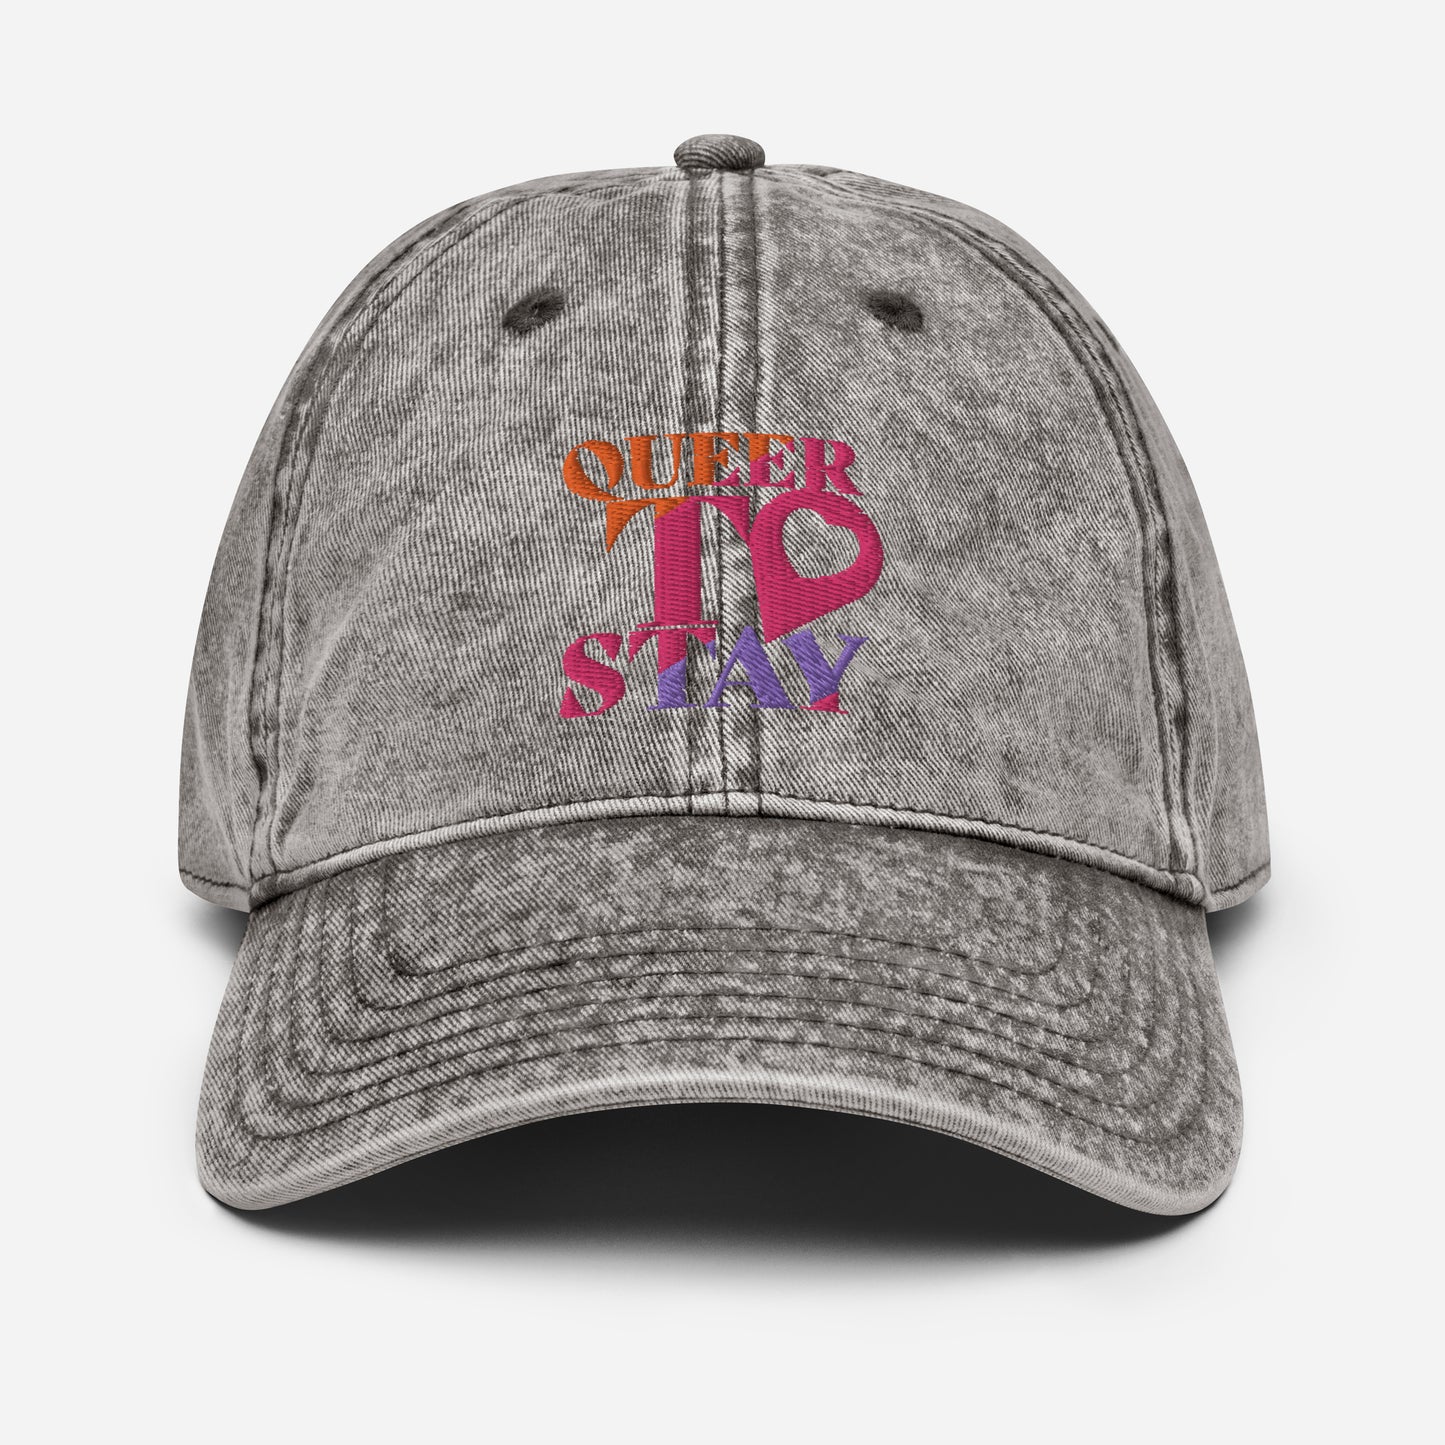 Showtime Gorra Queer To Stay Vintage